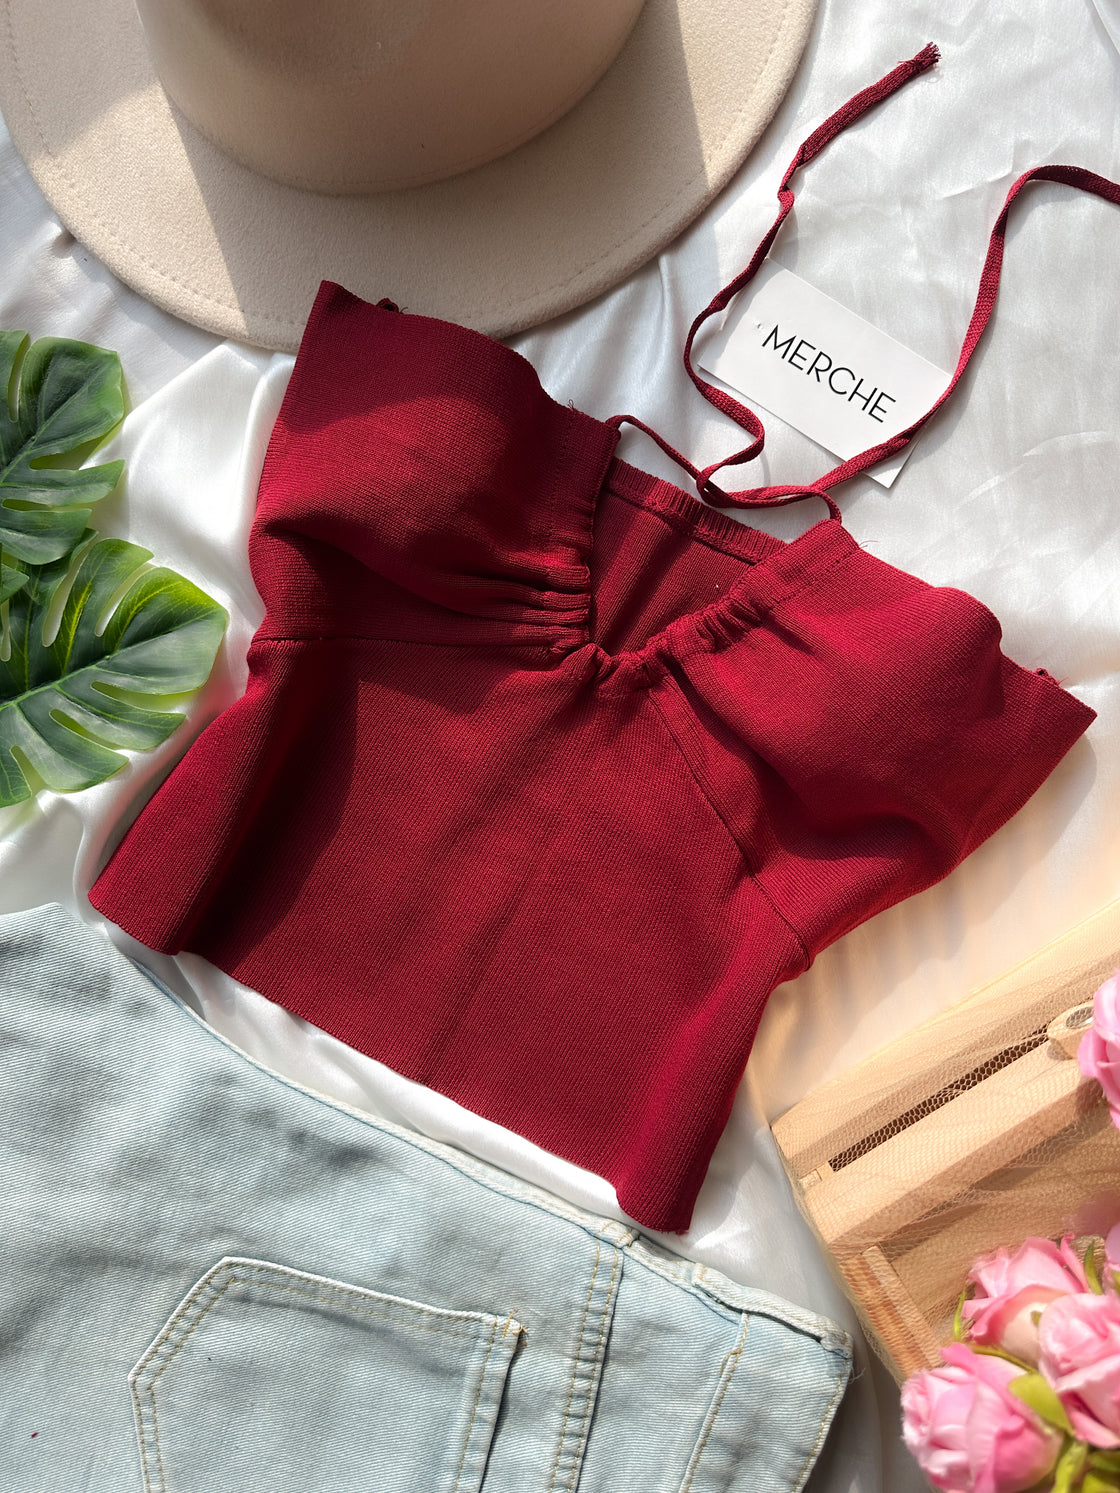 GO FOR A VACAY MAROON BANDEAU TOP